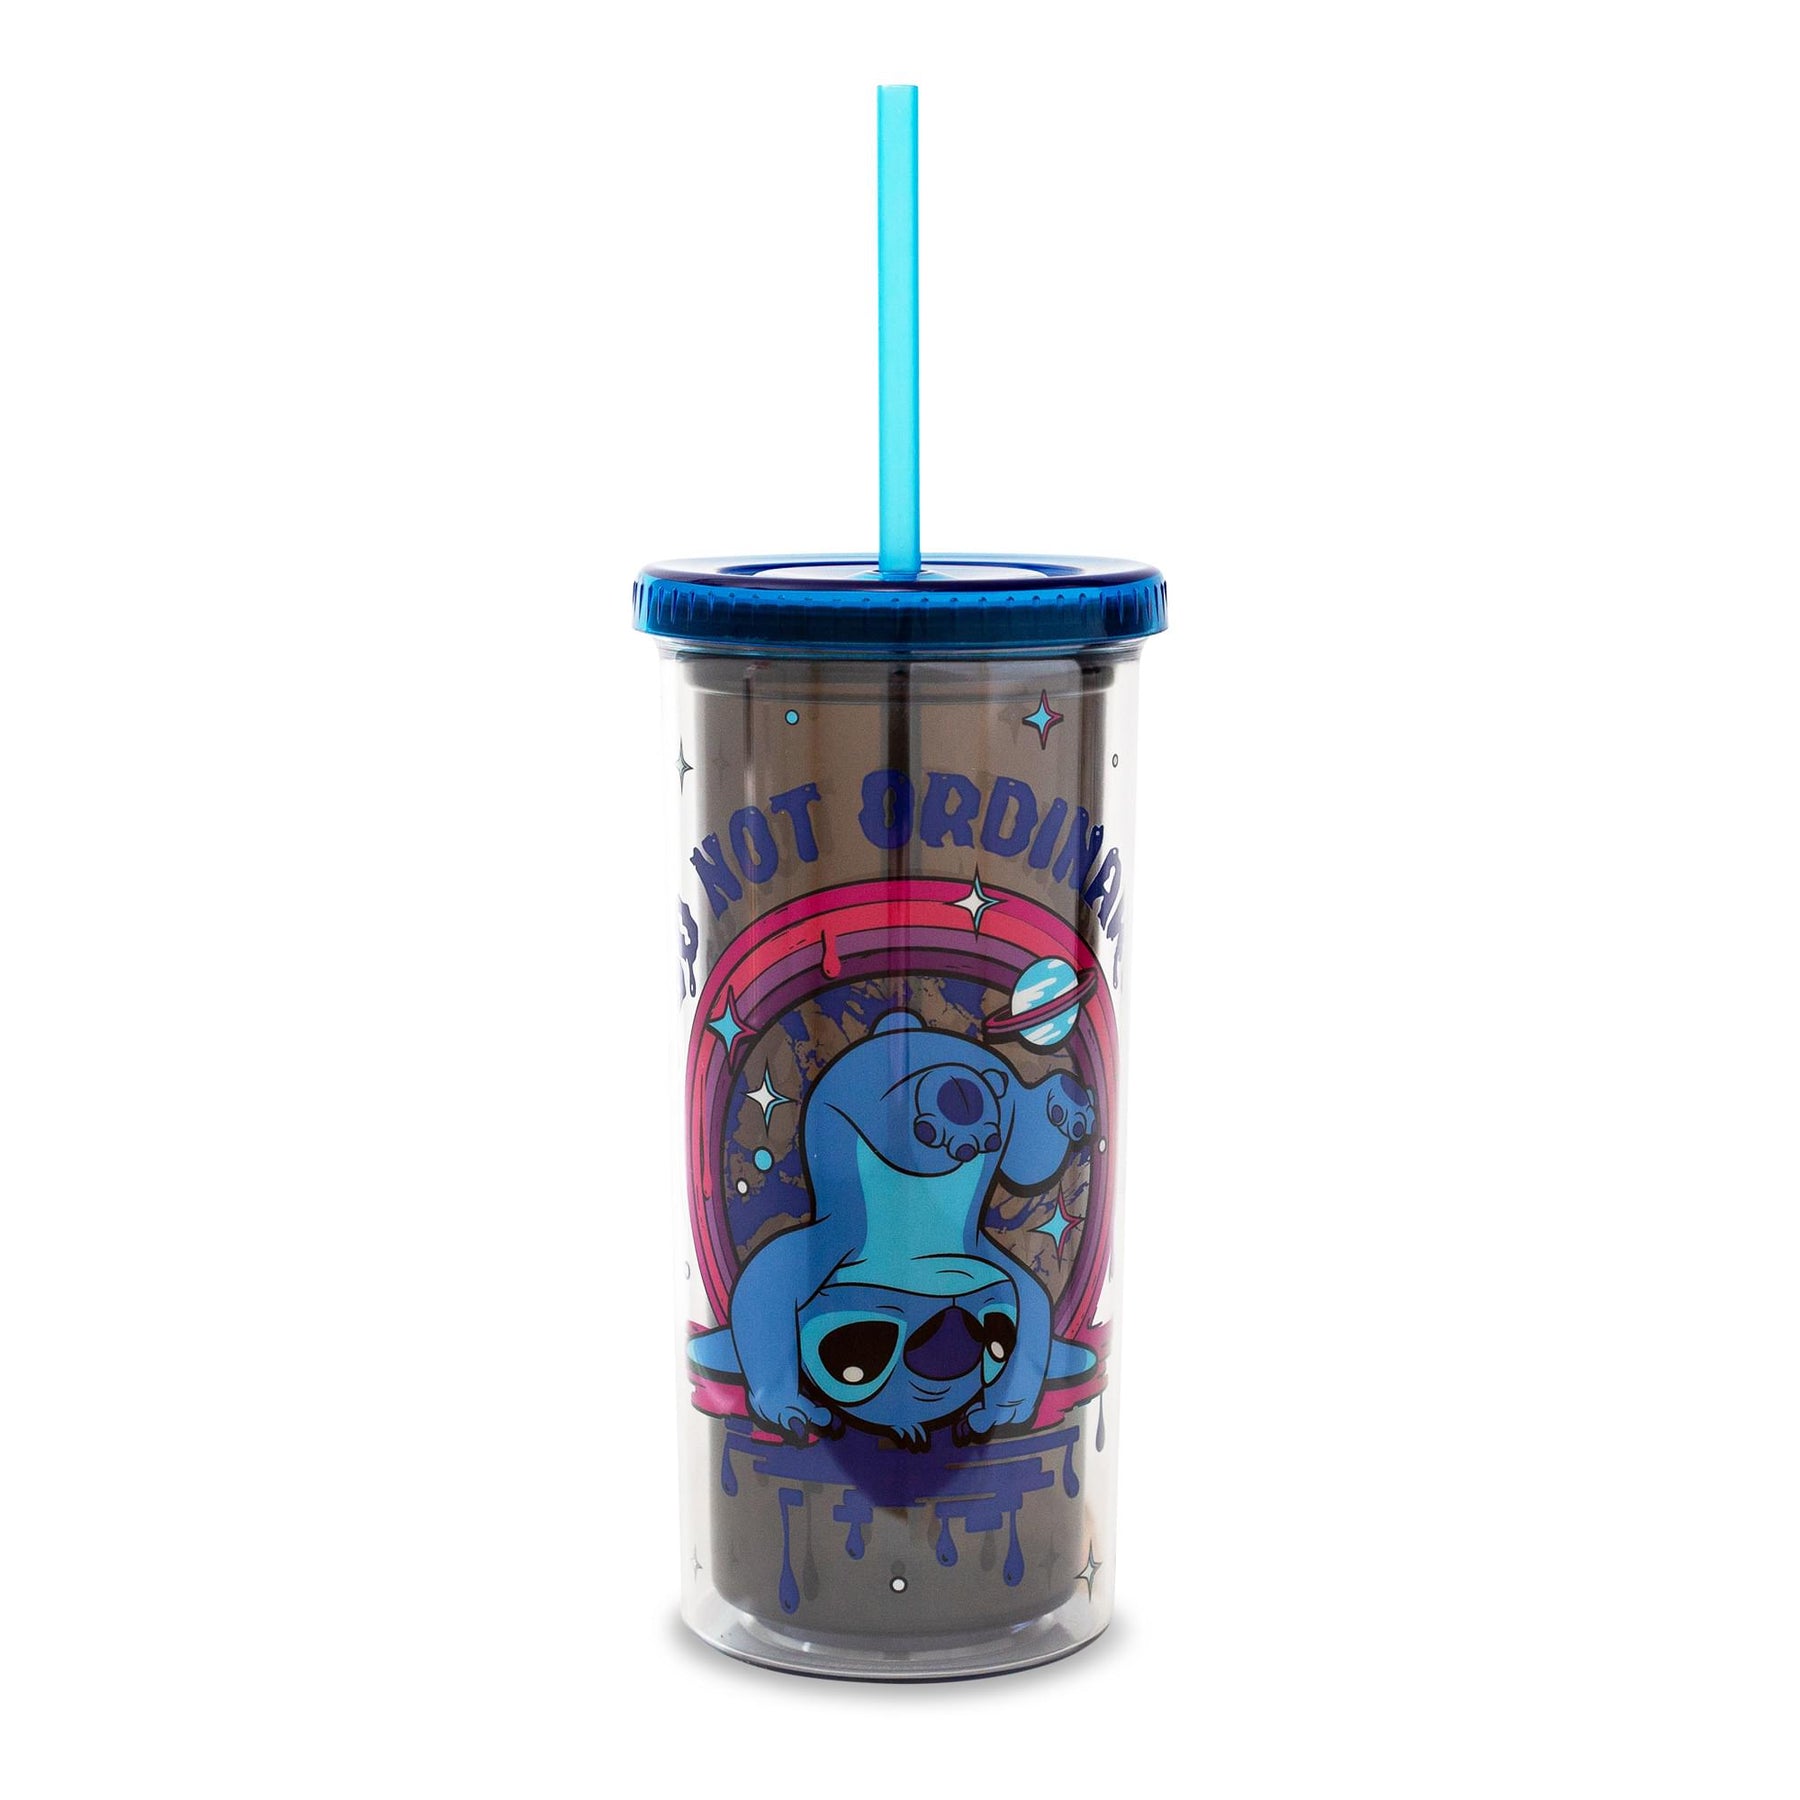 Disney Lilo & Stitch "So Not Ordinary" 20-Ounce Carnival Cup With Lid and Straw